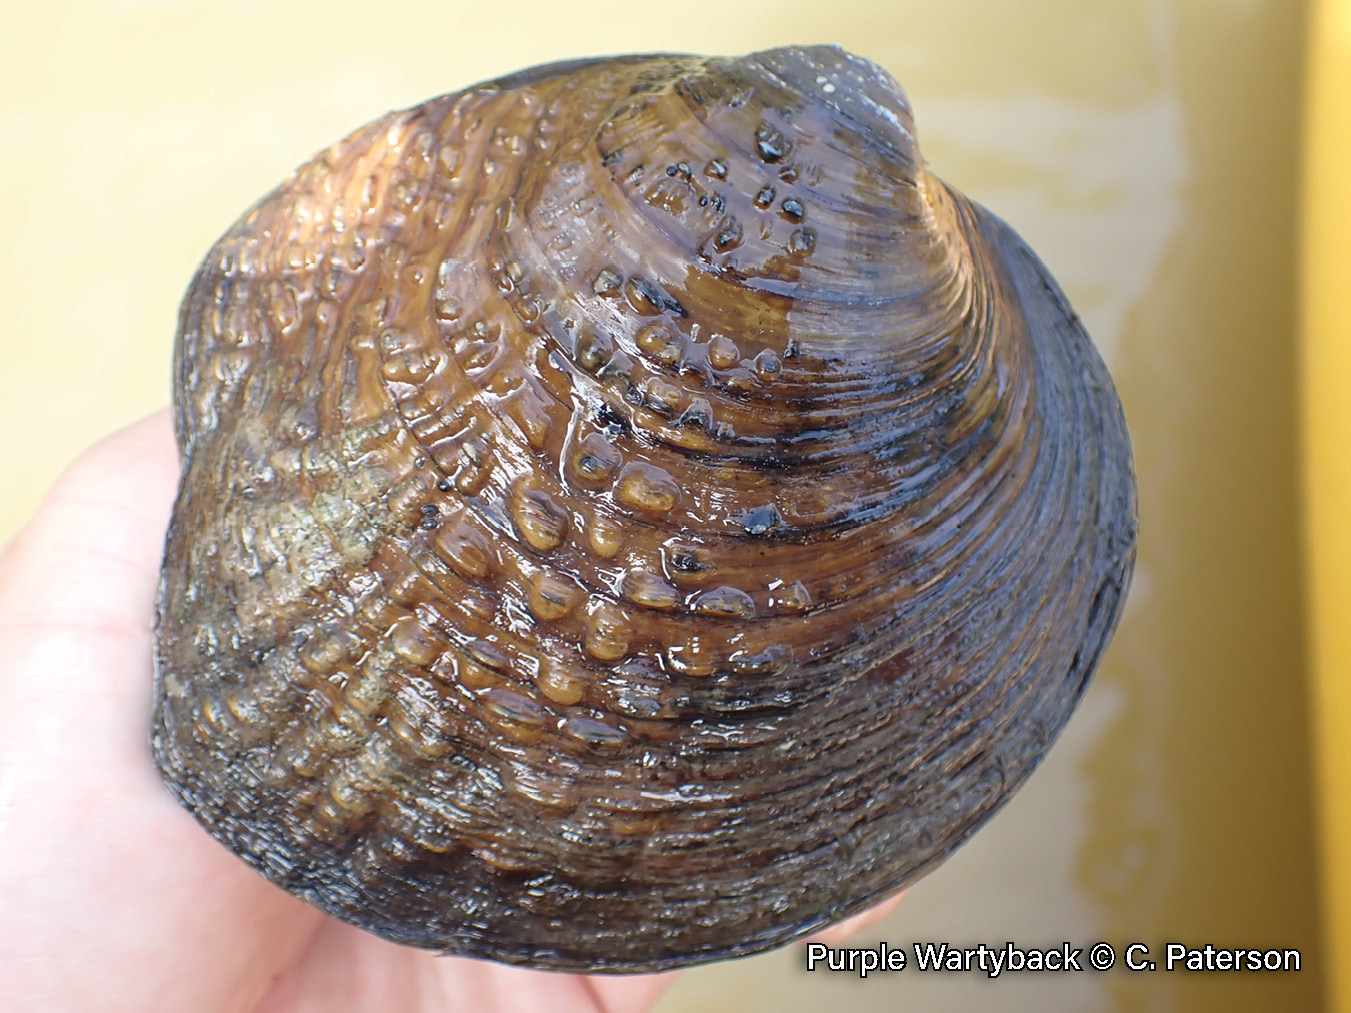 Picture of a Purple Wartyback mussel in a hand, a rich reddish-brown, medium-sized mussel that is covered in bumps